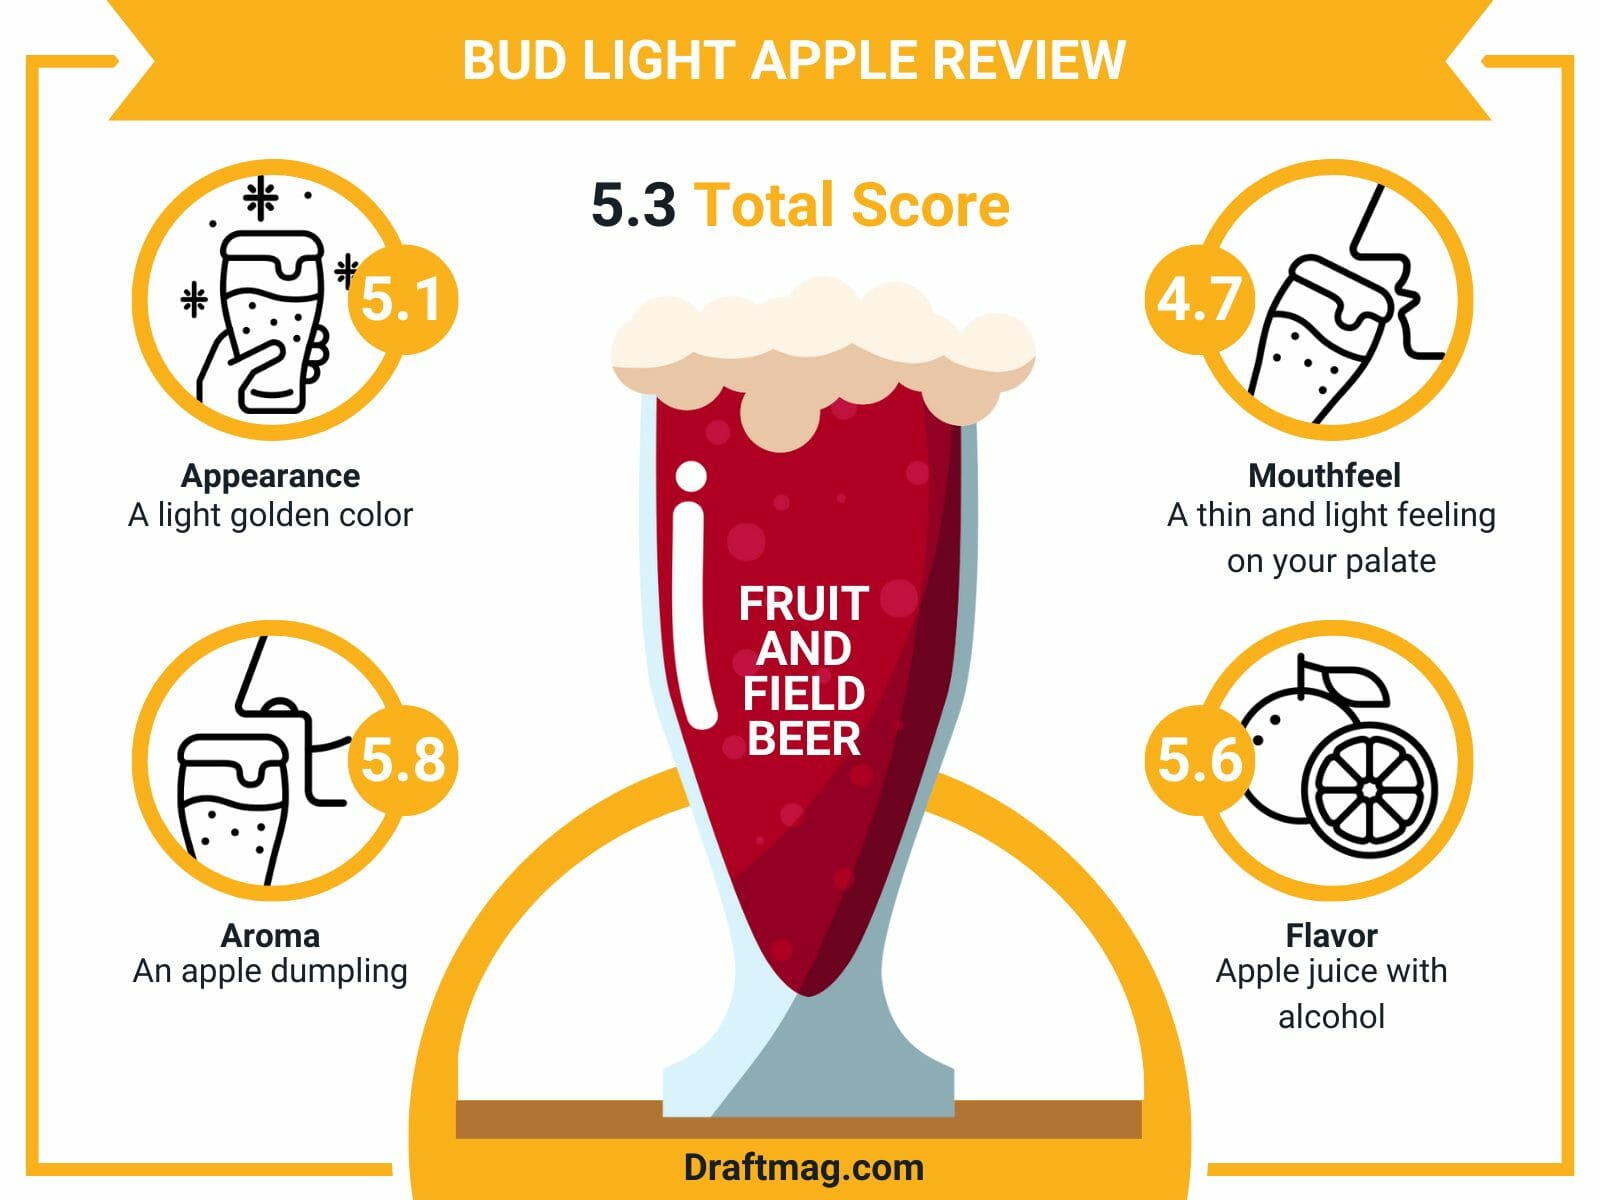 Bud light apple review infographic